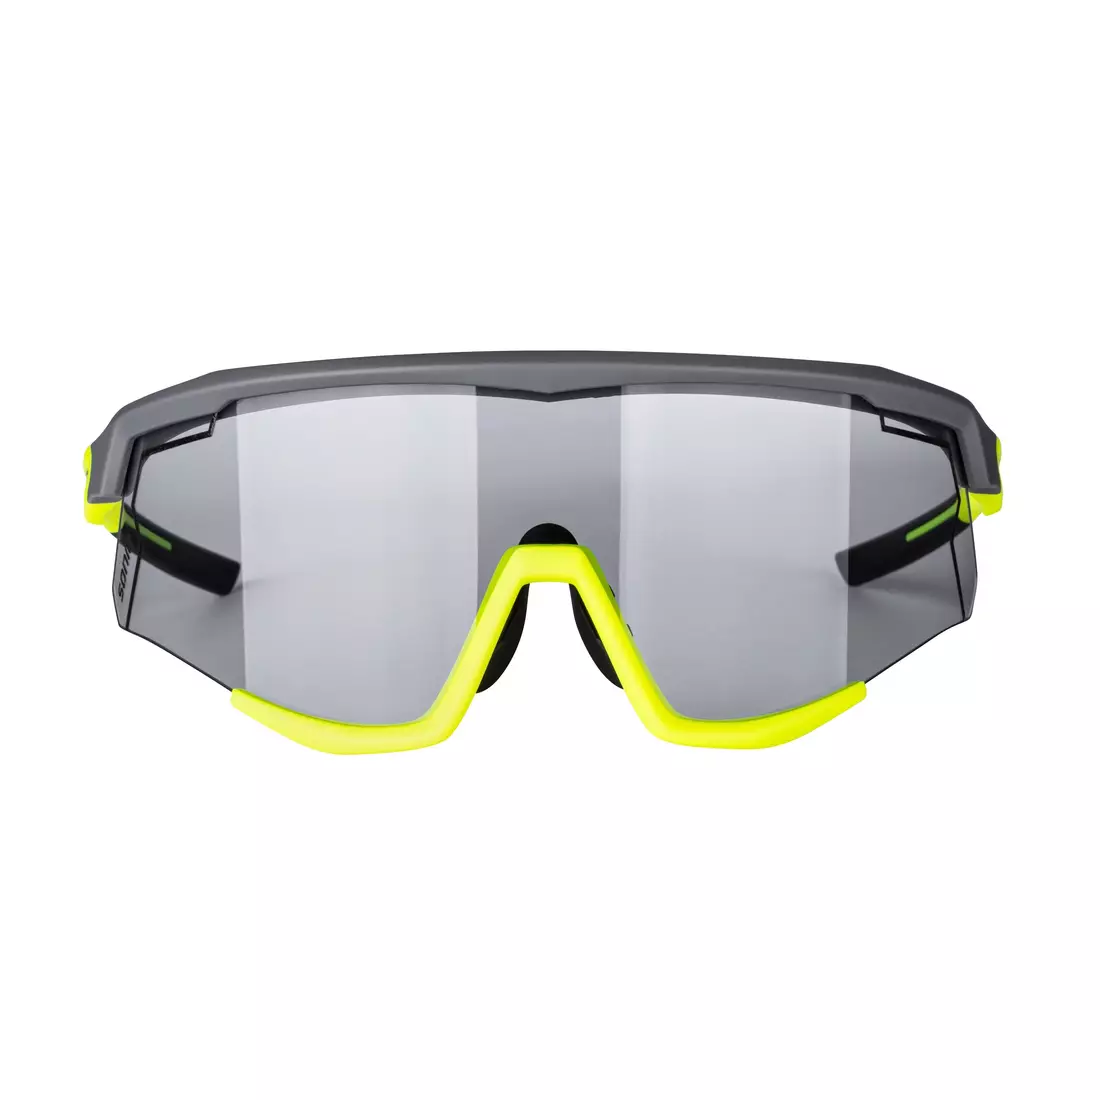 FORCE cycling / sports glasses SONIC, photochromic, gray-fluo, 910958